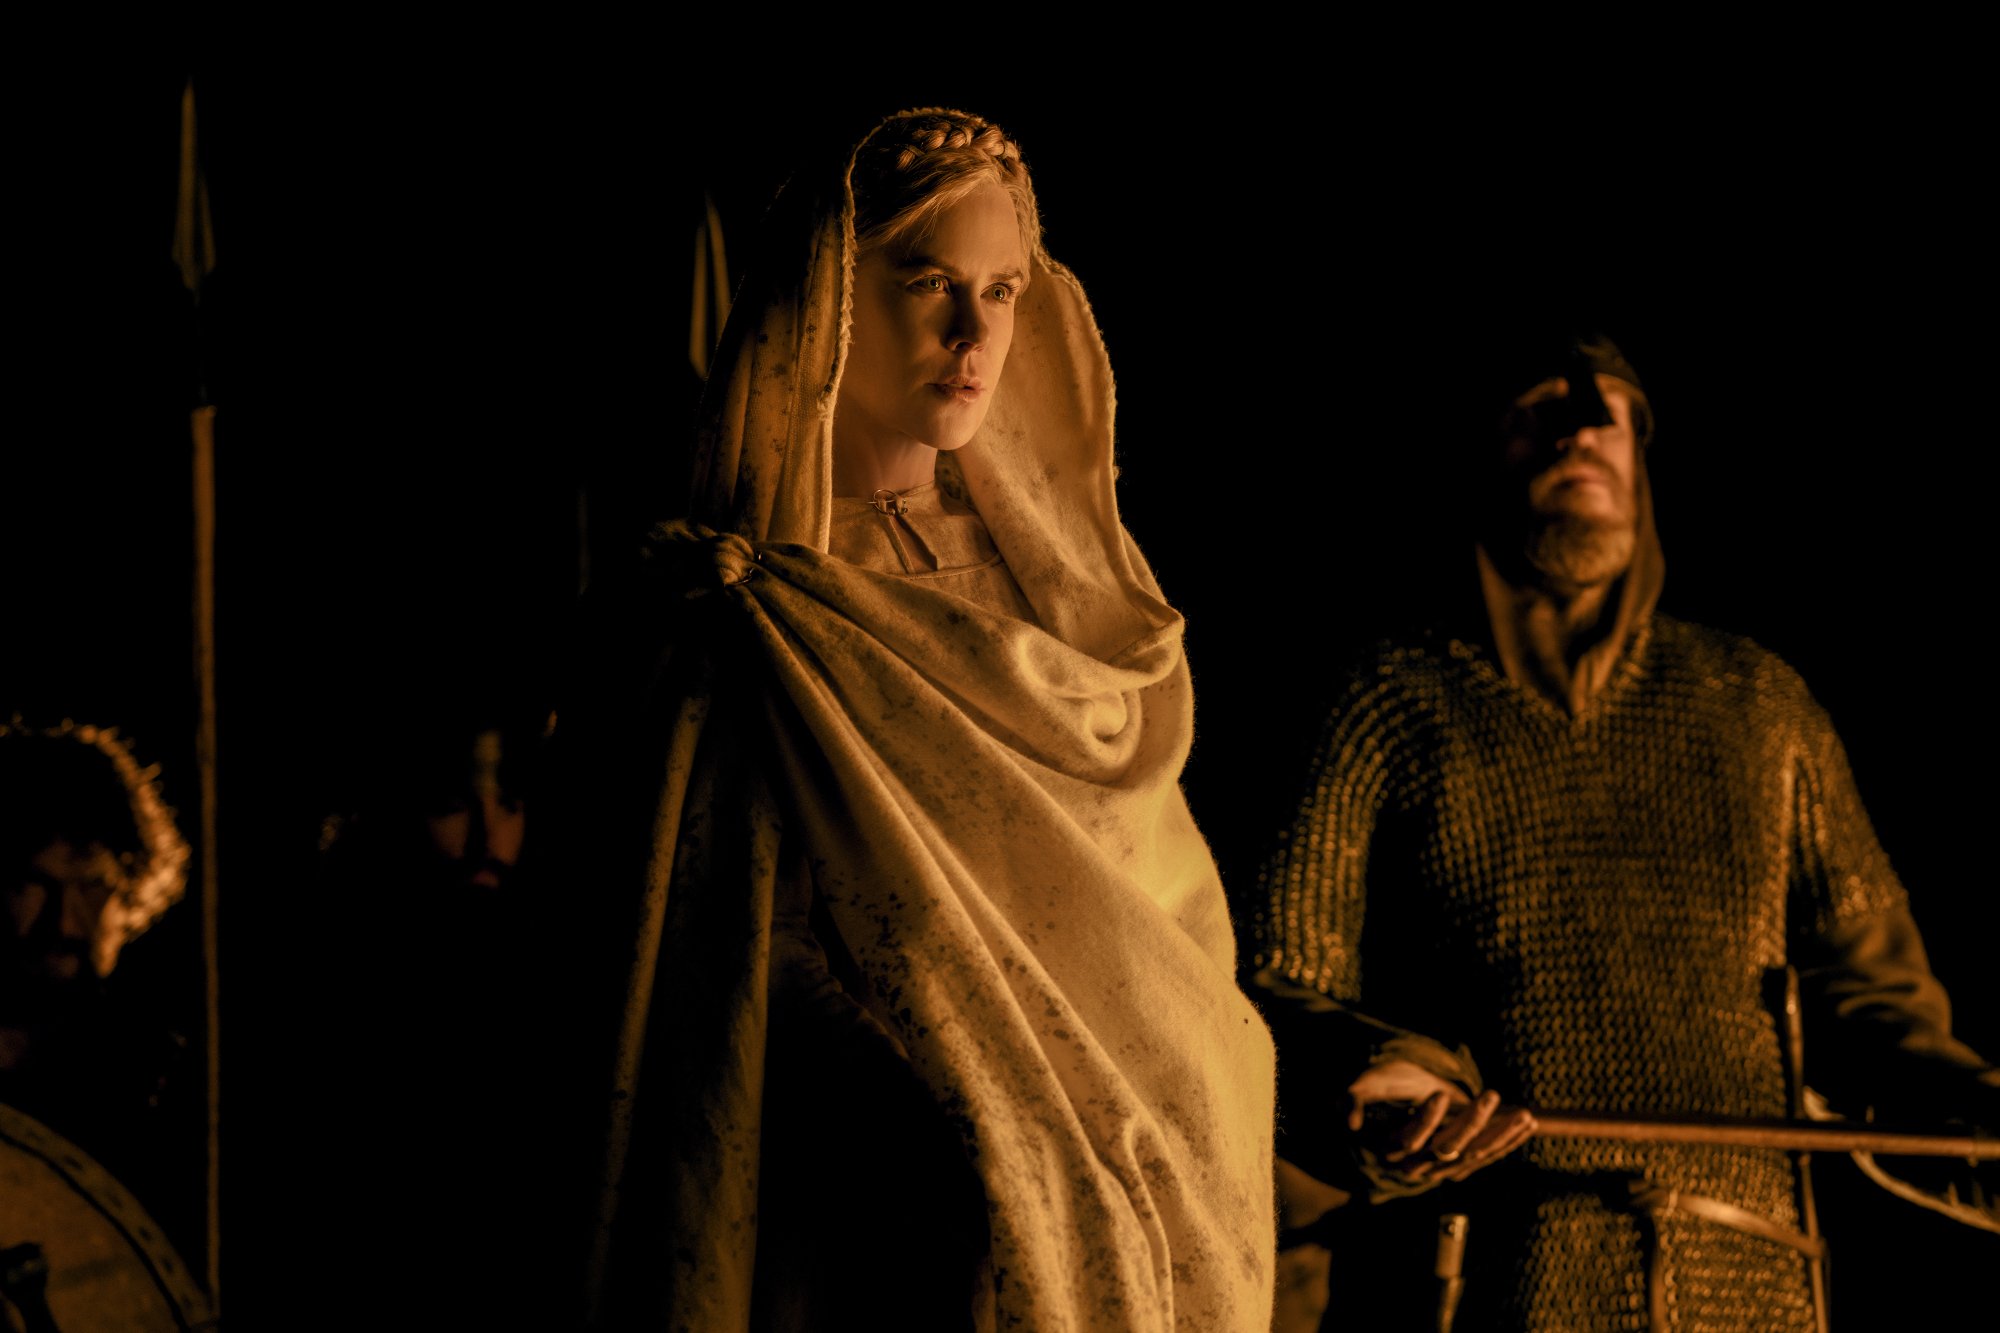 'The Northman' Nicole Kidman as Queen Gudrún wearing a white costume with a guard standing behind her